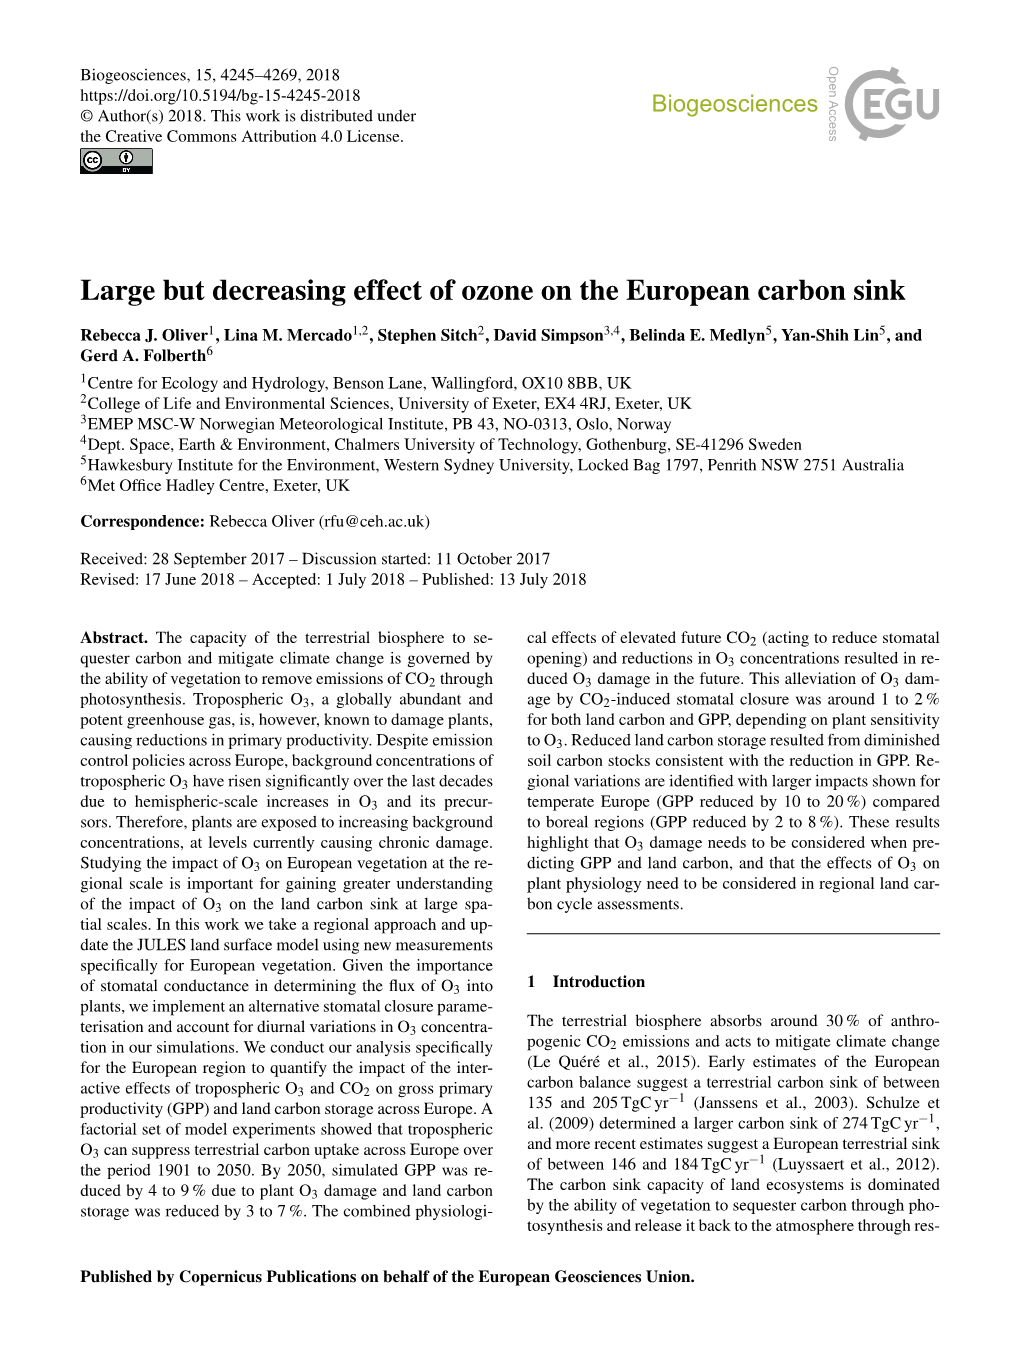 Large but Decreasing Effect of Ozone on the European Carbon Sink